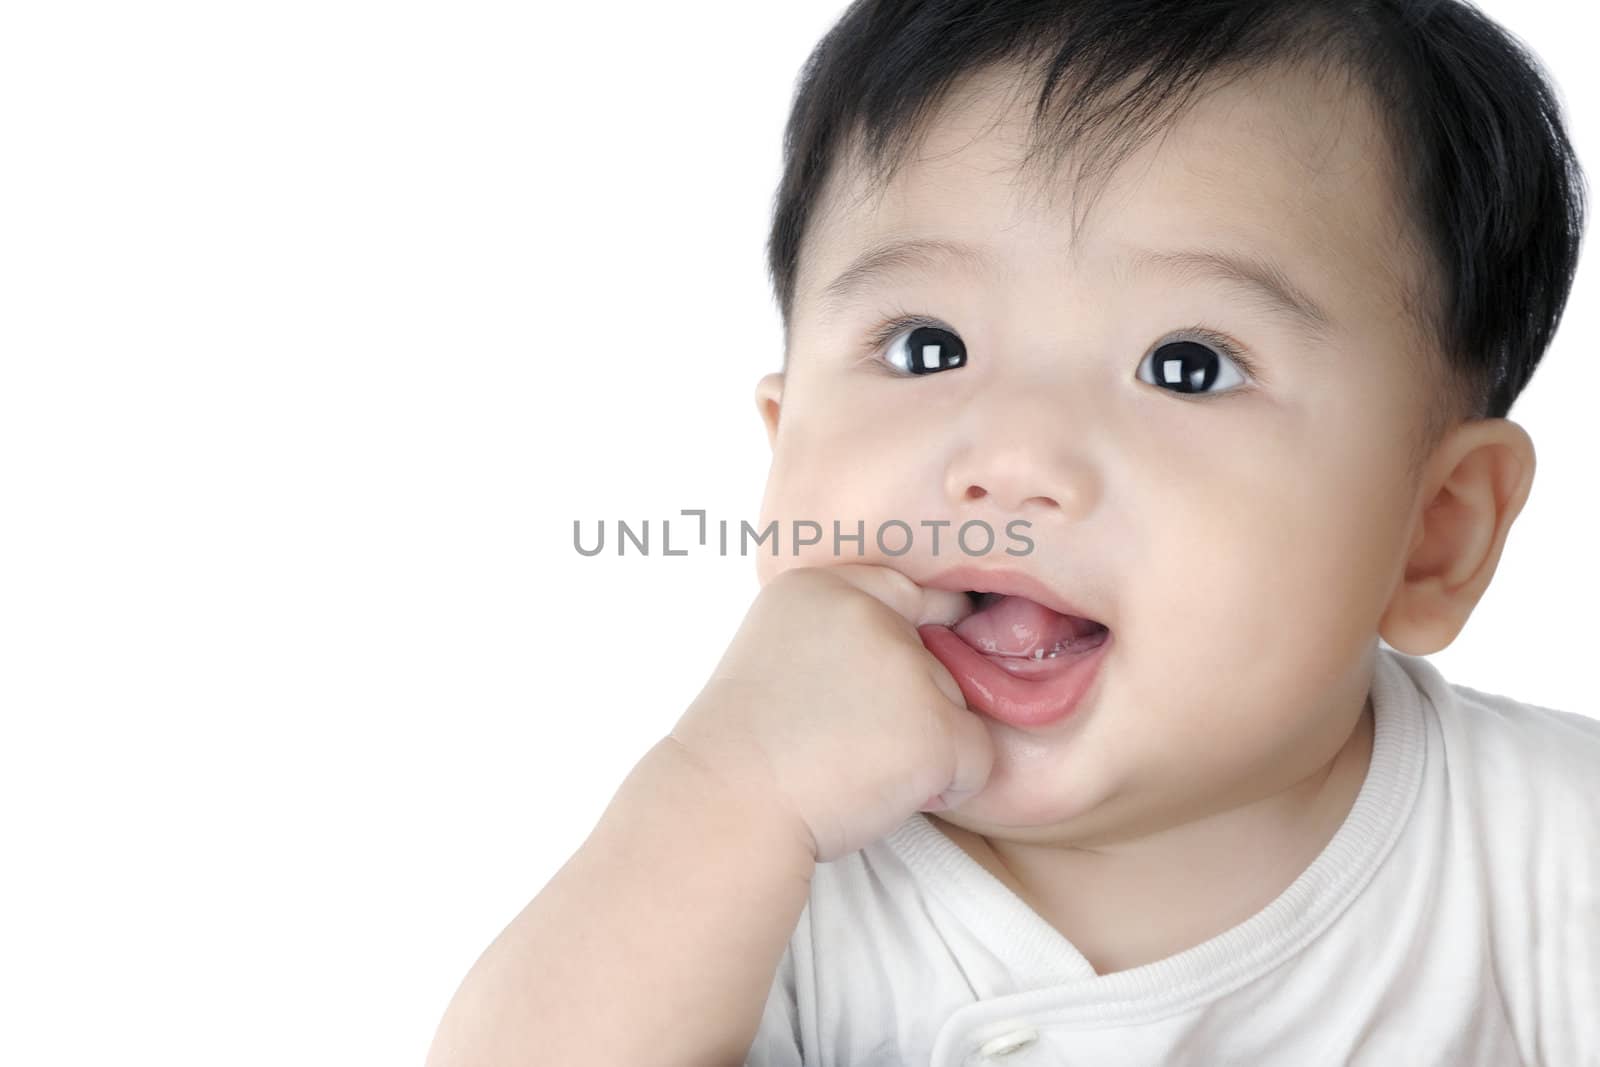 Close-up portrait of an adorable infant baby putting finger in his mouth, isolated on white.